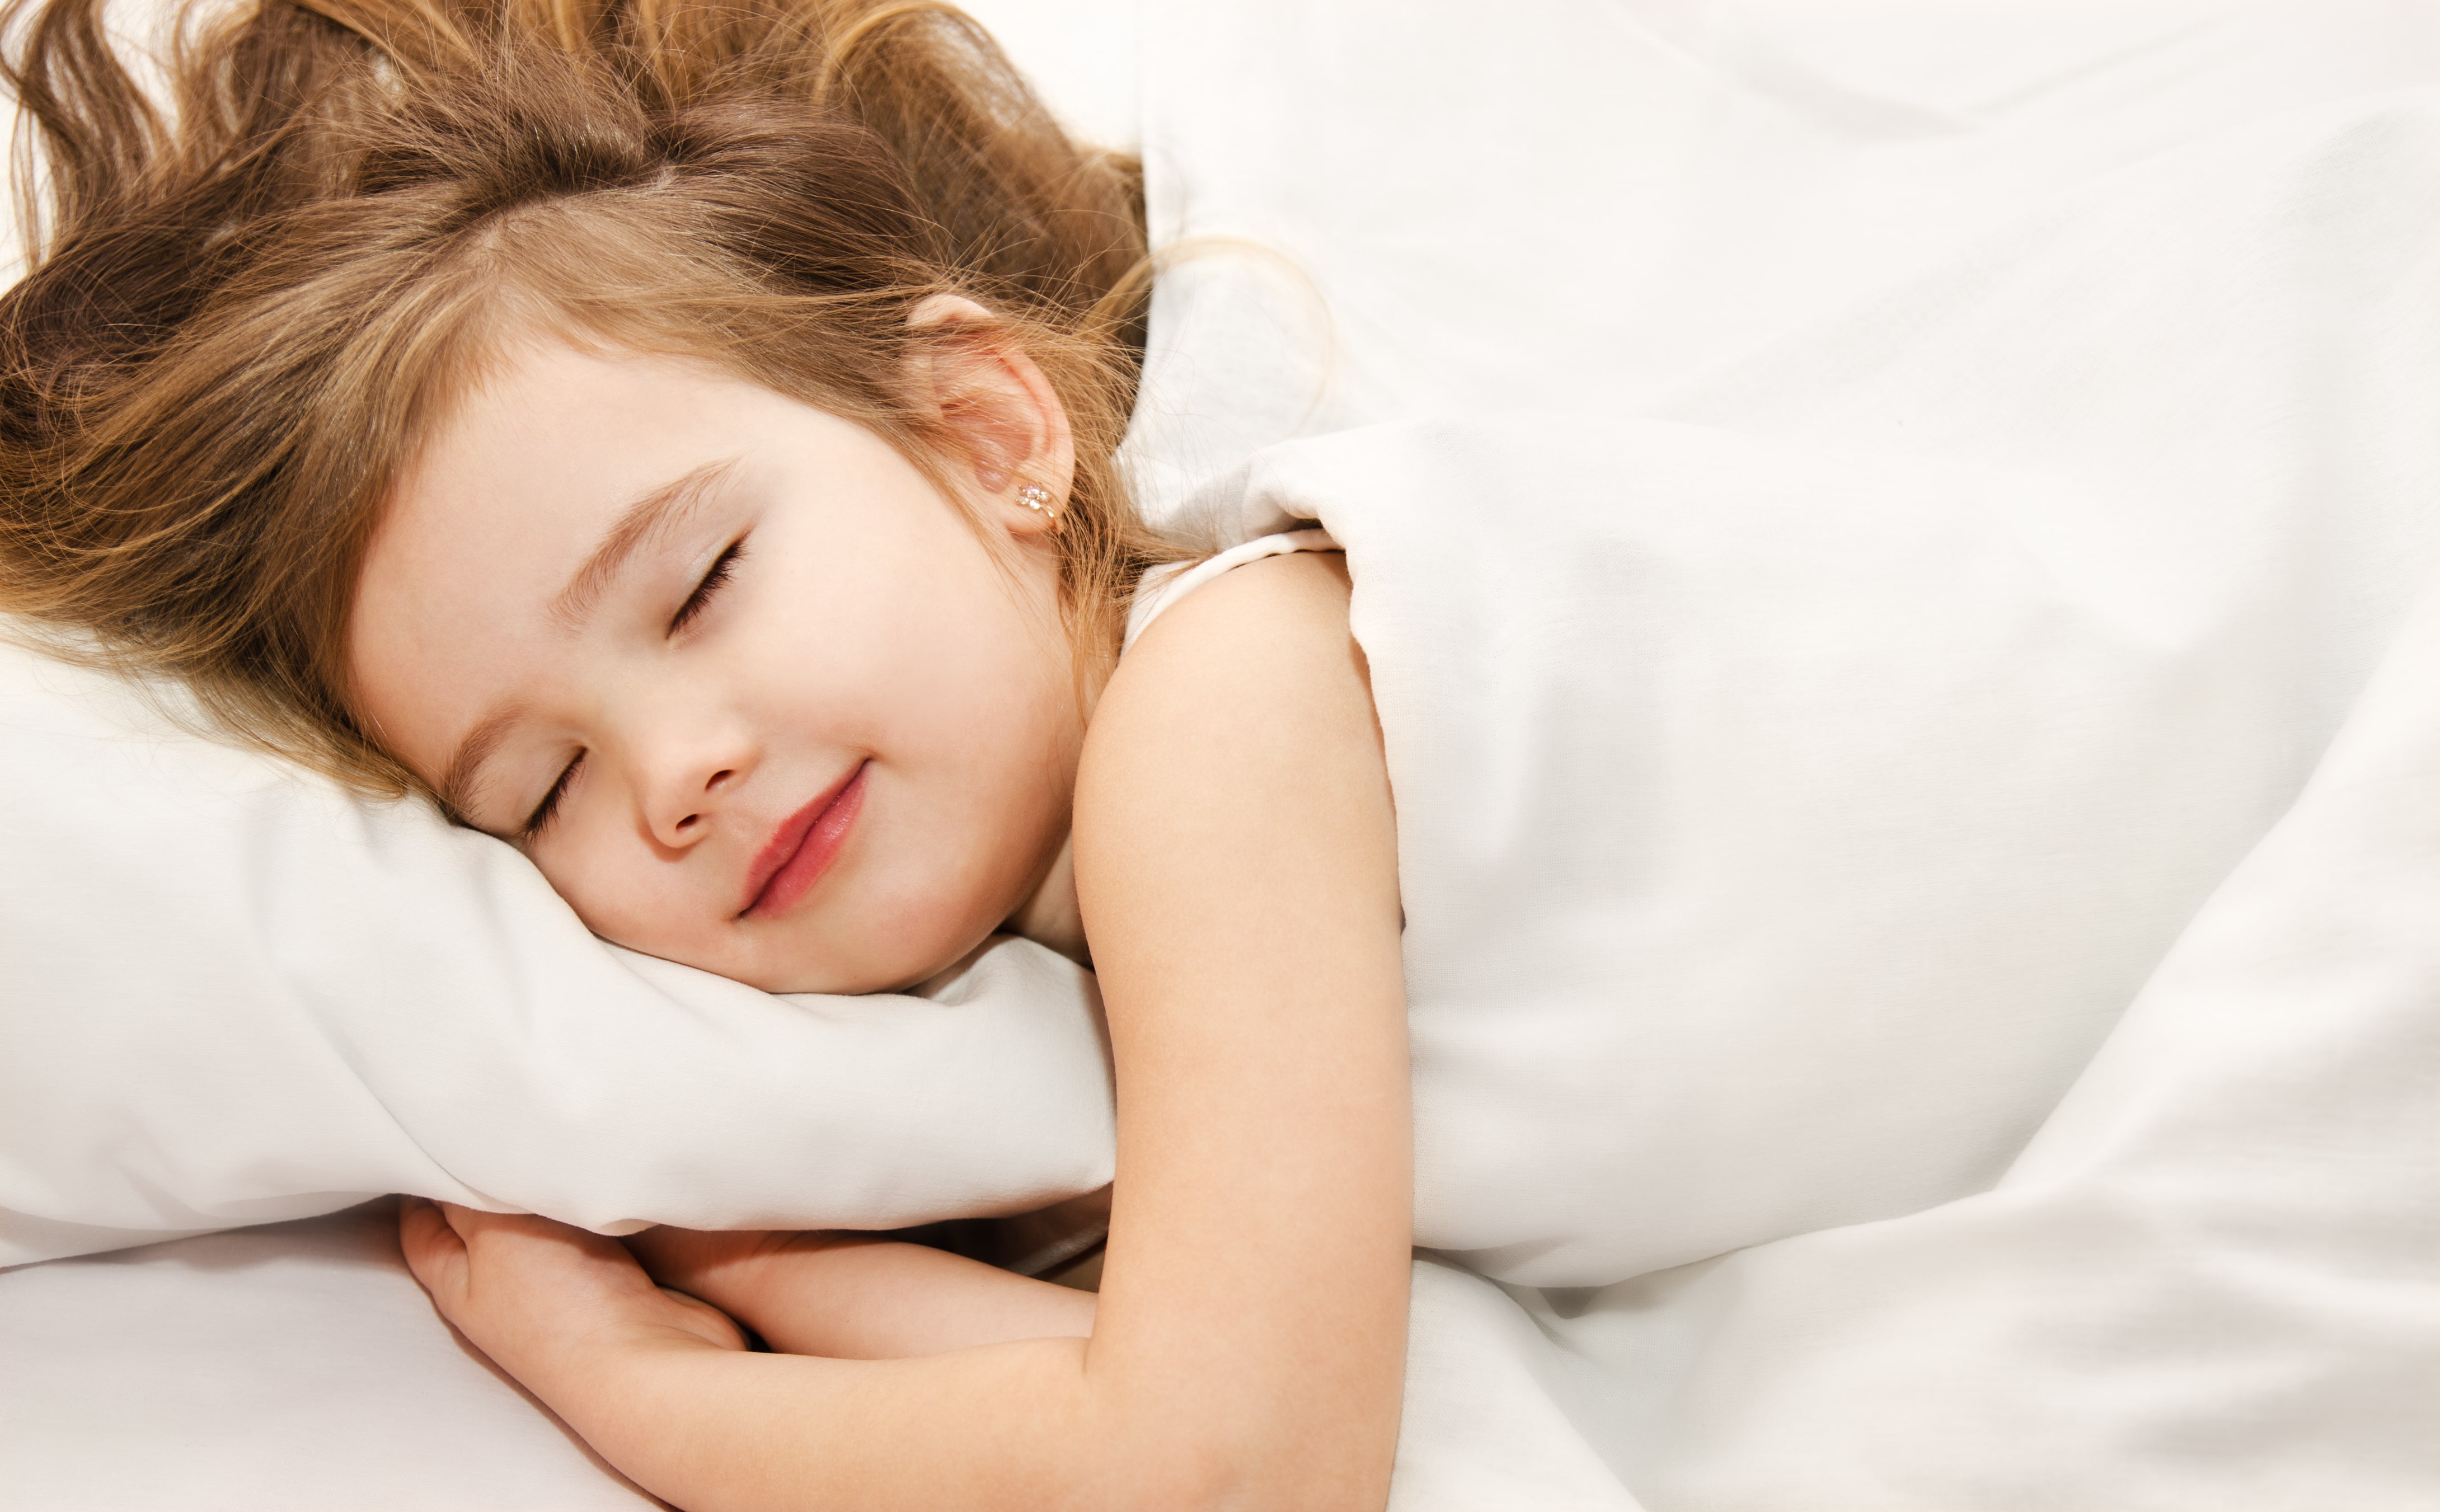 A little girl sleeping under a white duvet, hugging her pillow and smiling while her hair cascades around her 